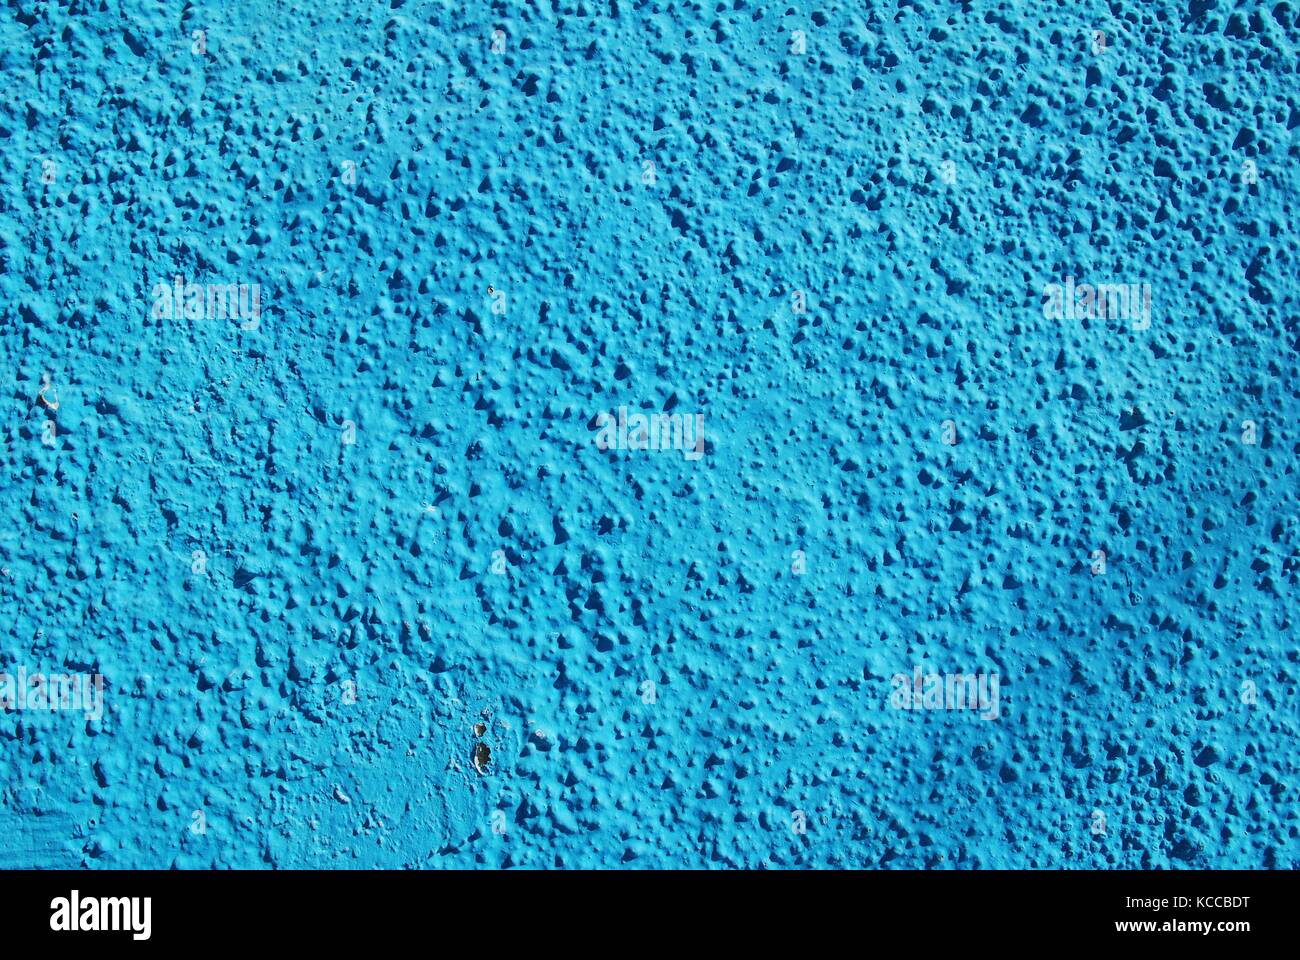 Background image of a blue painted wall of a building on the Greek island of Symi. Stock Photo